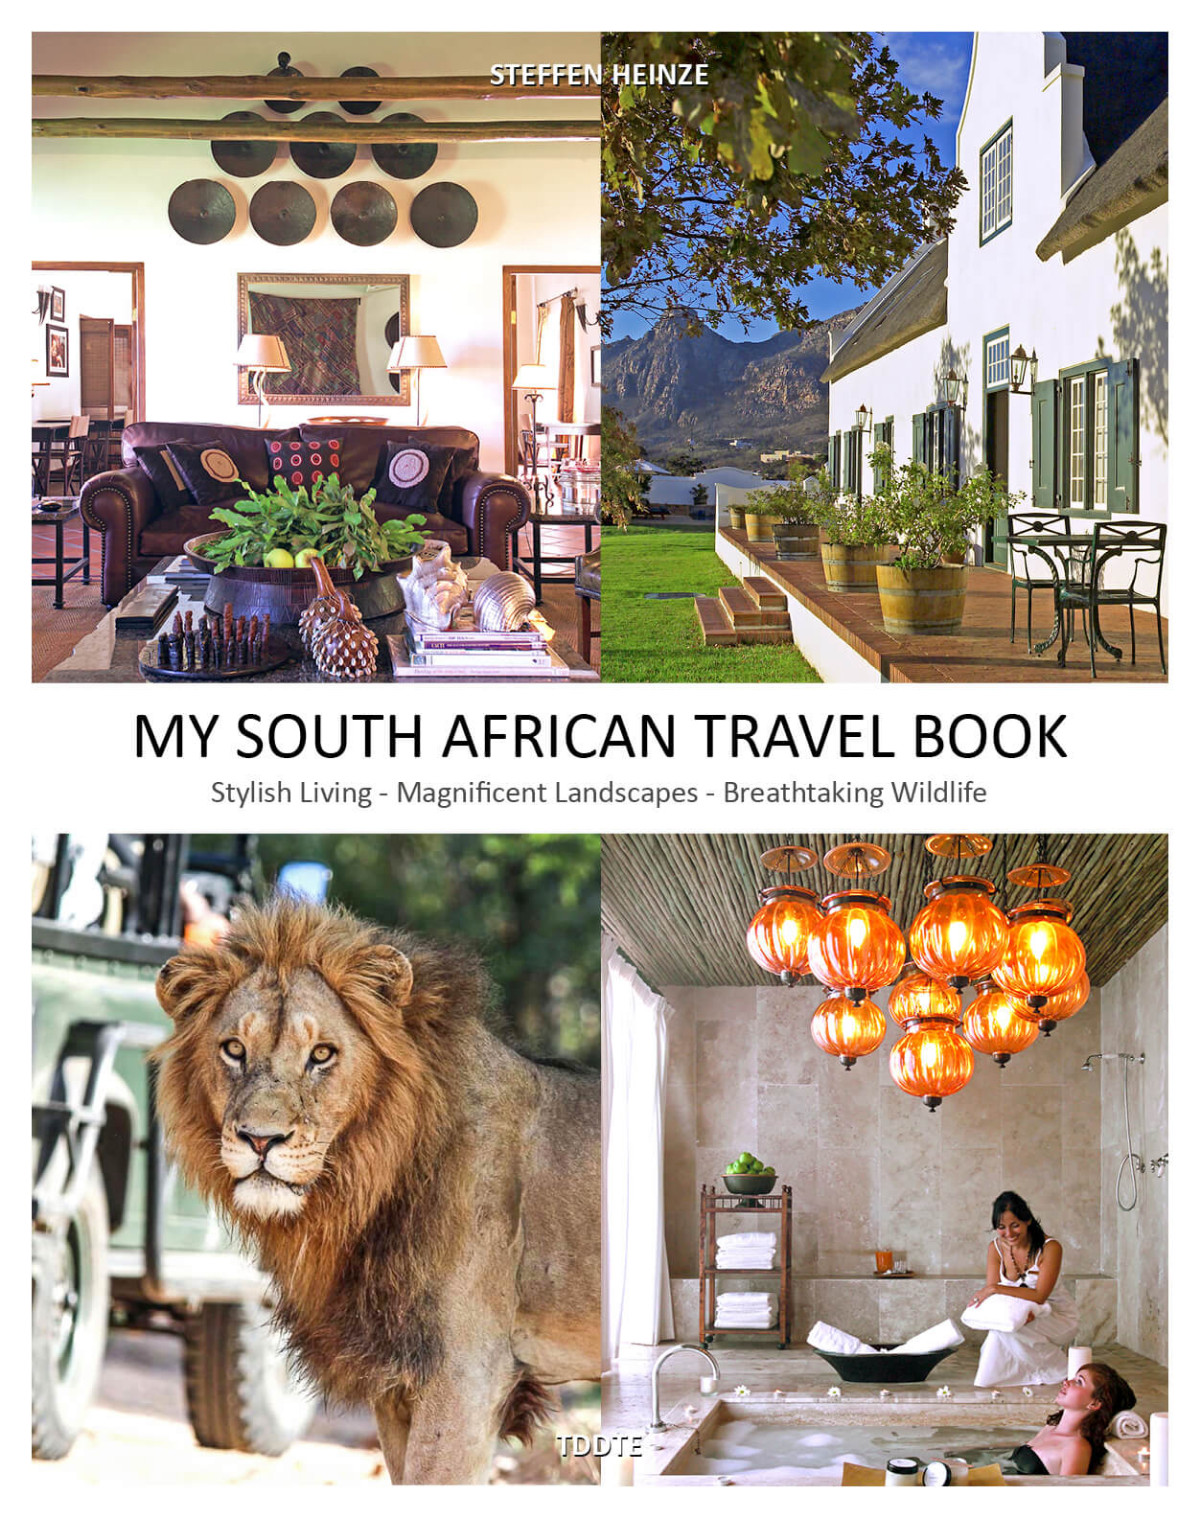 MY SOUTH AFRICAN TRAVEL BOOK